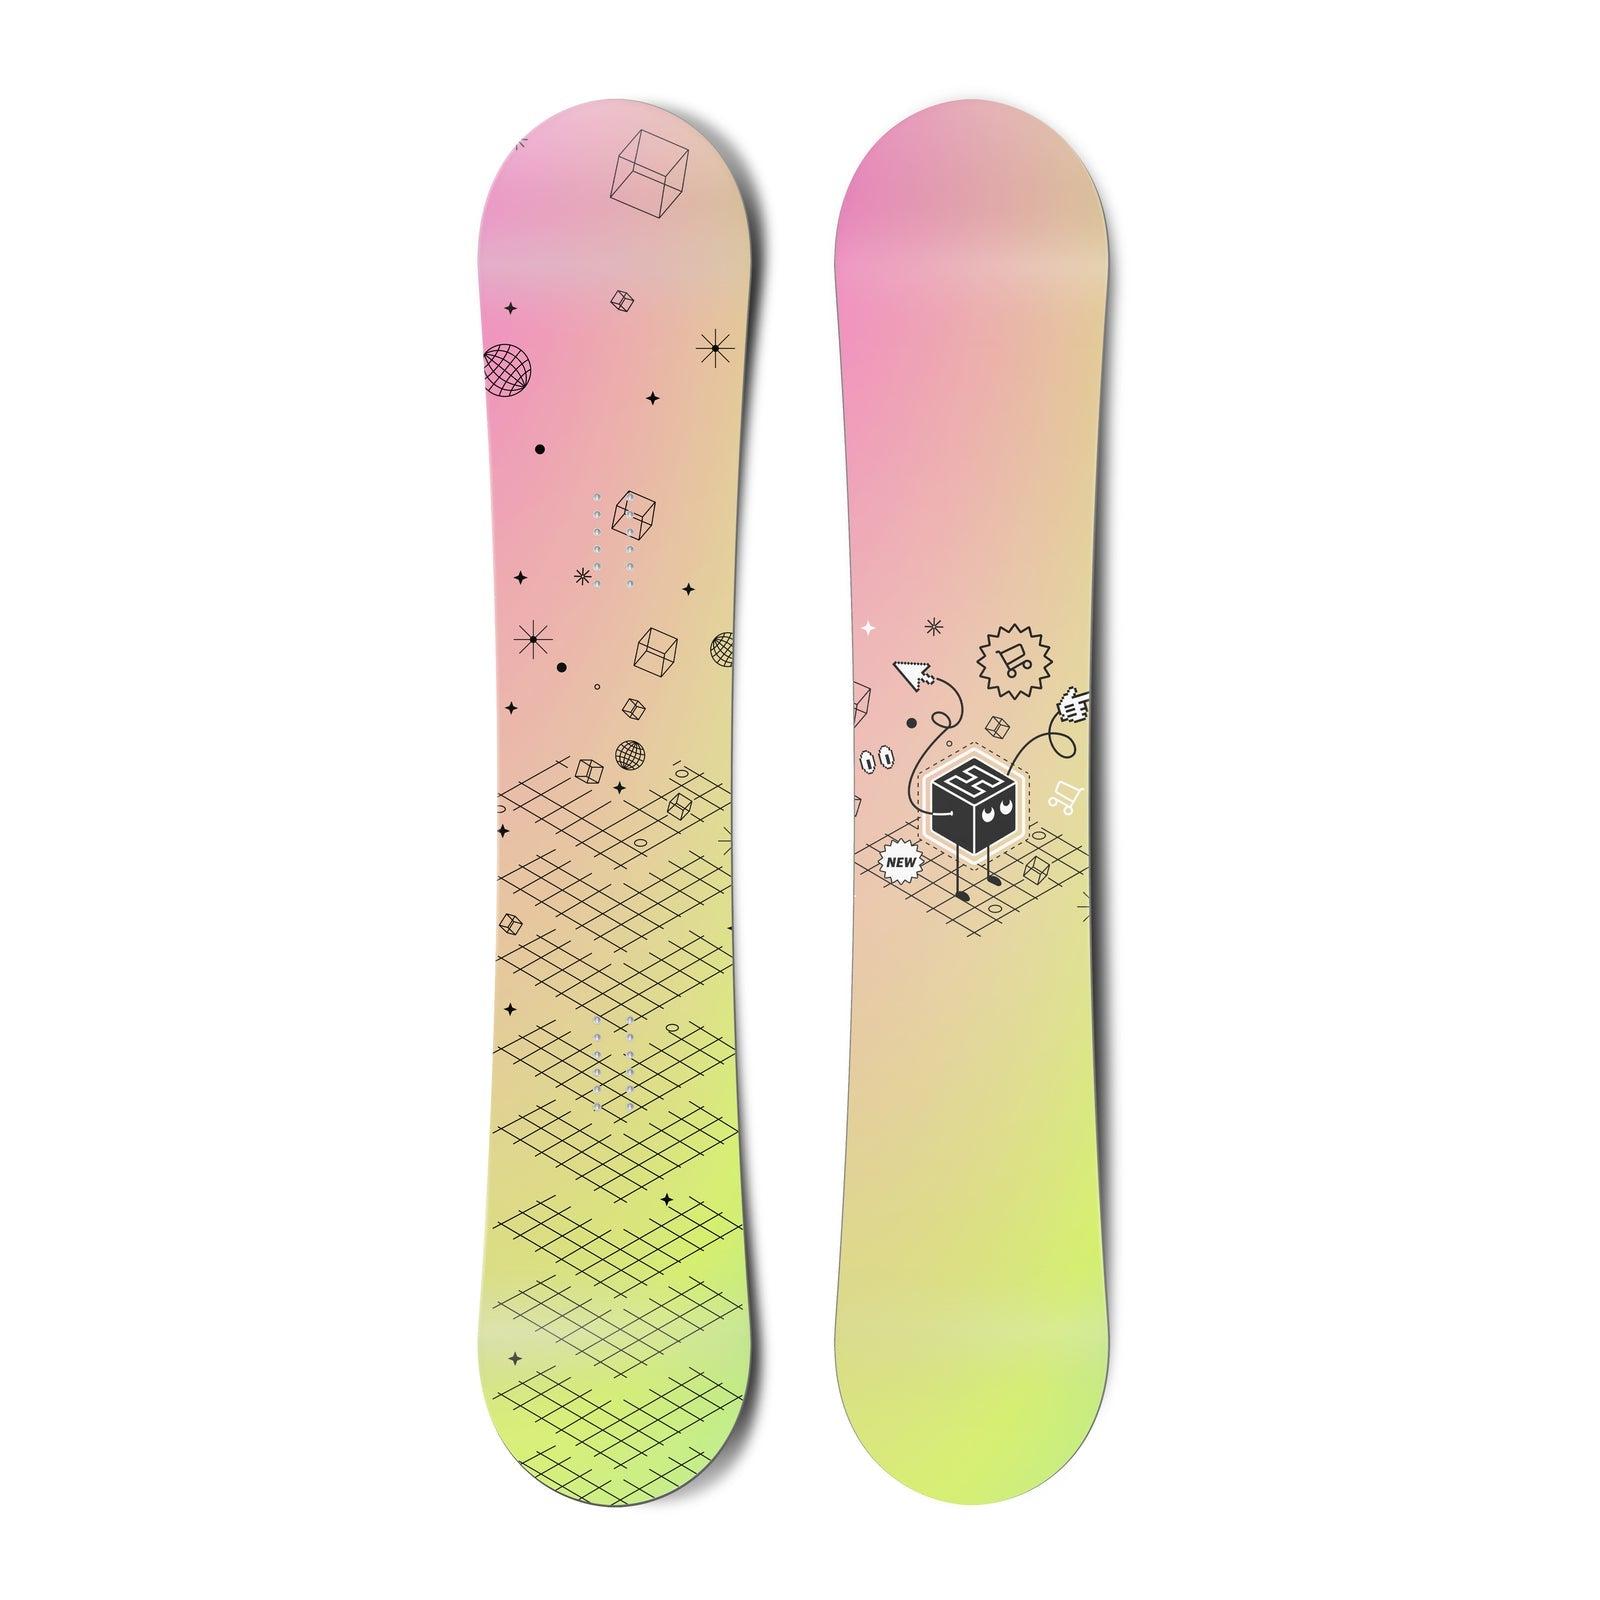 Top and bottom view of a snowboard. The top view shows an illustration with varied outlined shapes
          in black. The bottom view shows a black box character with an H pointing, and surrounded by black outlined
          illustrative elements.